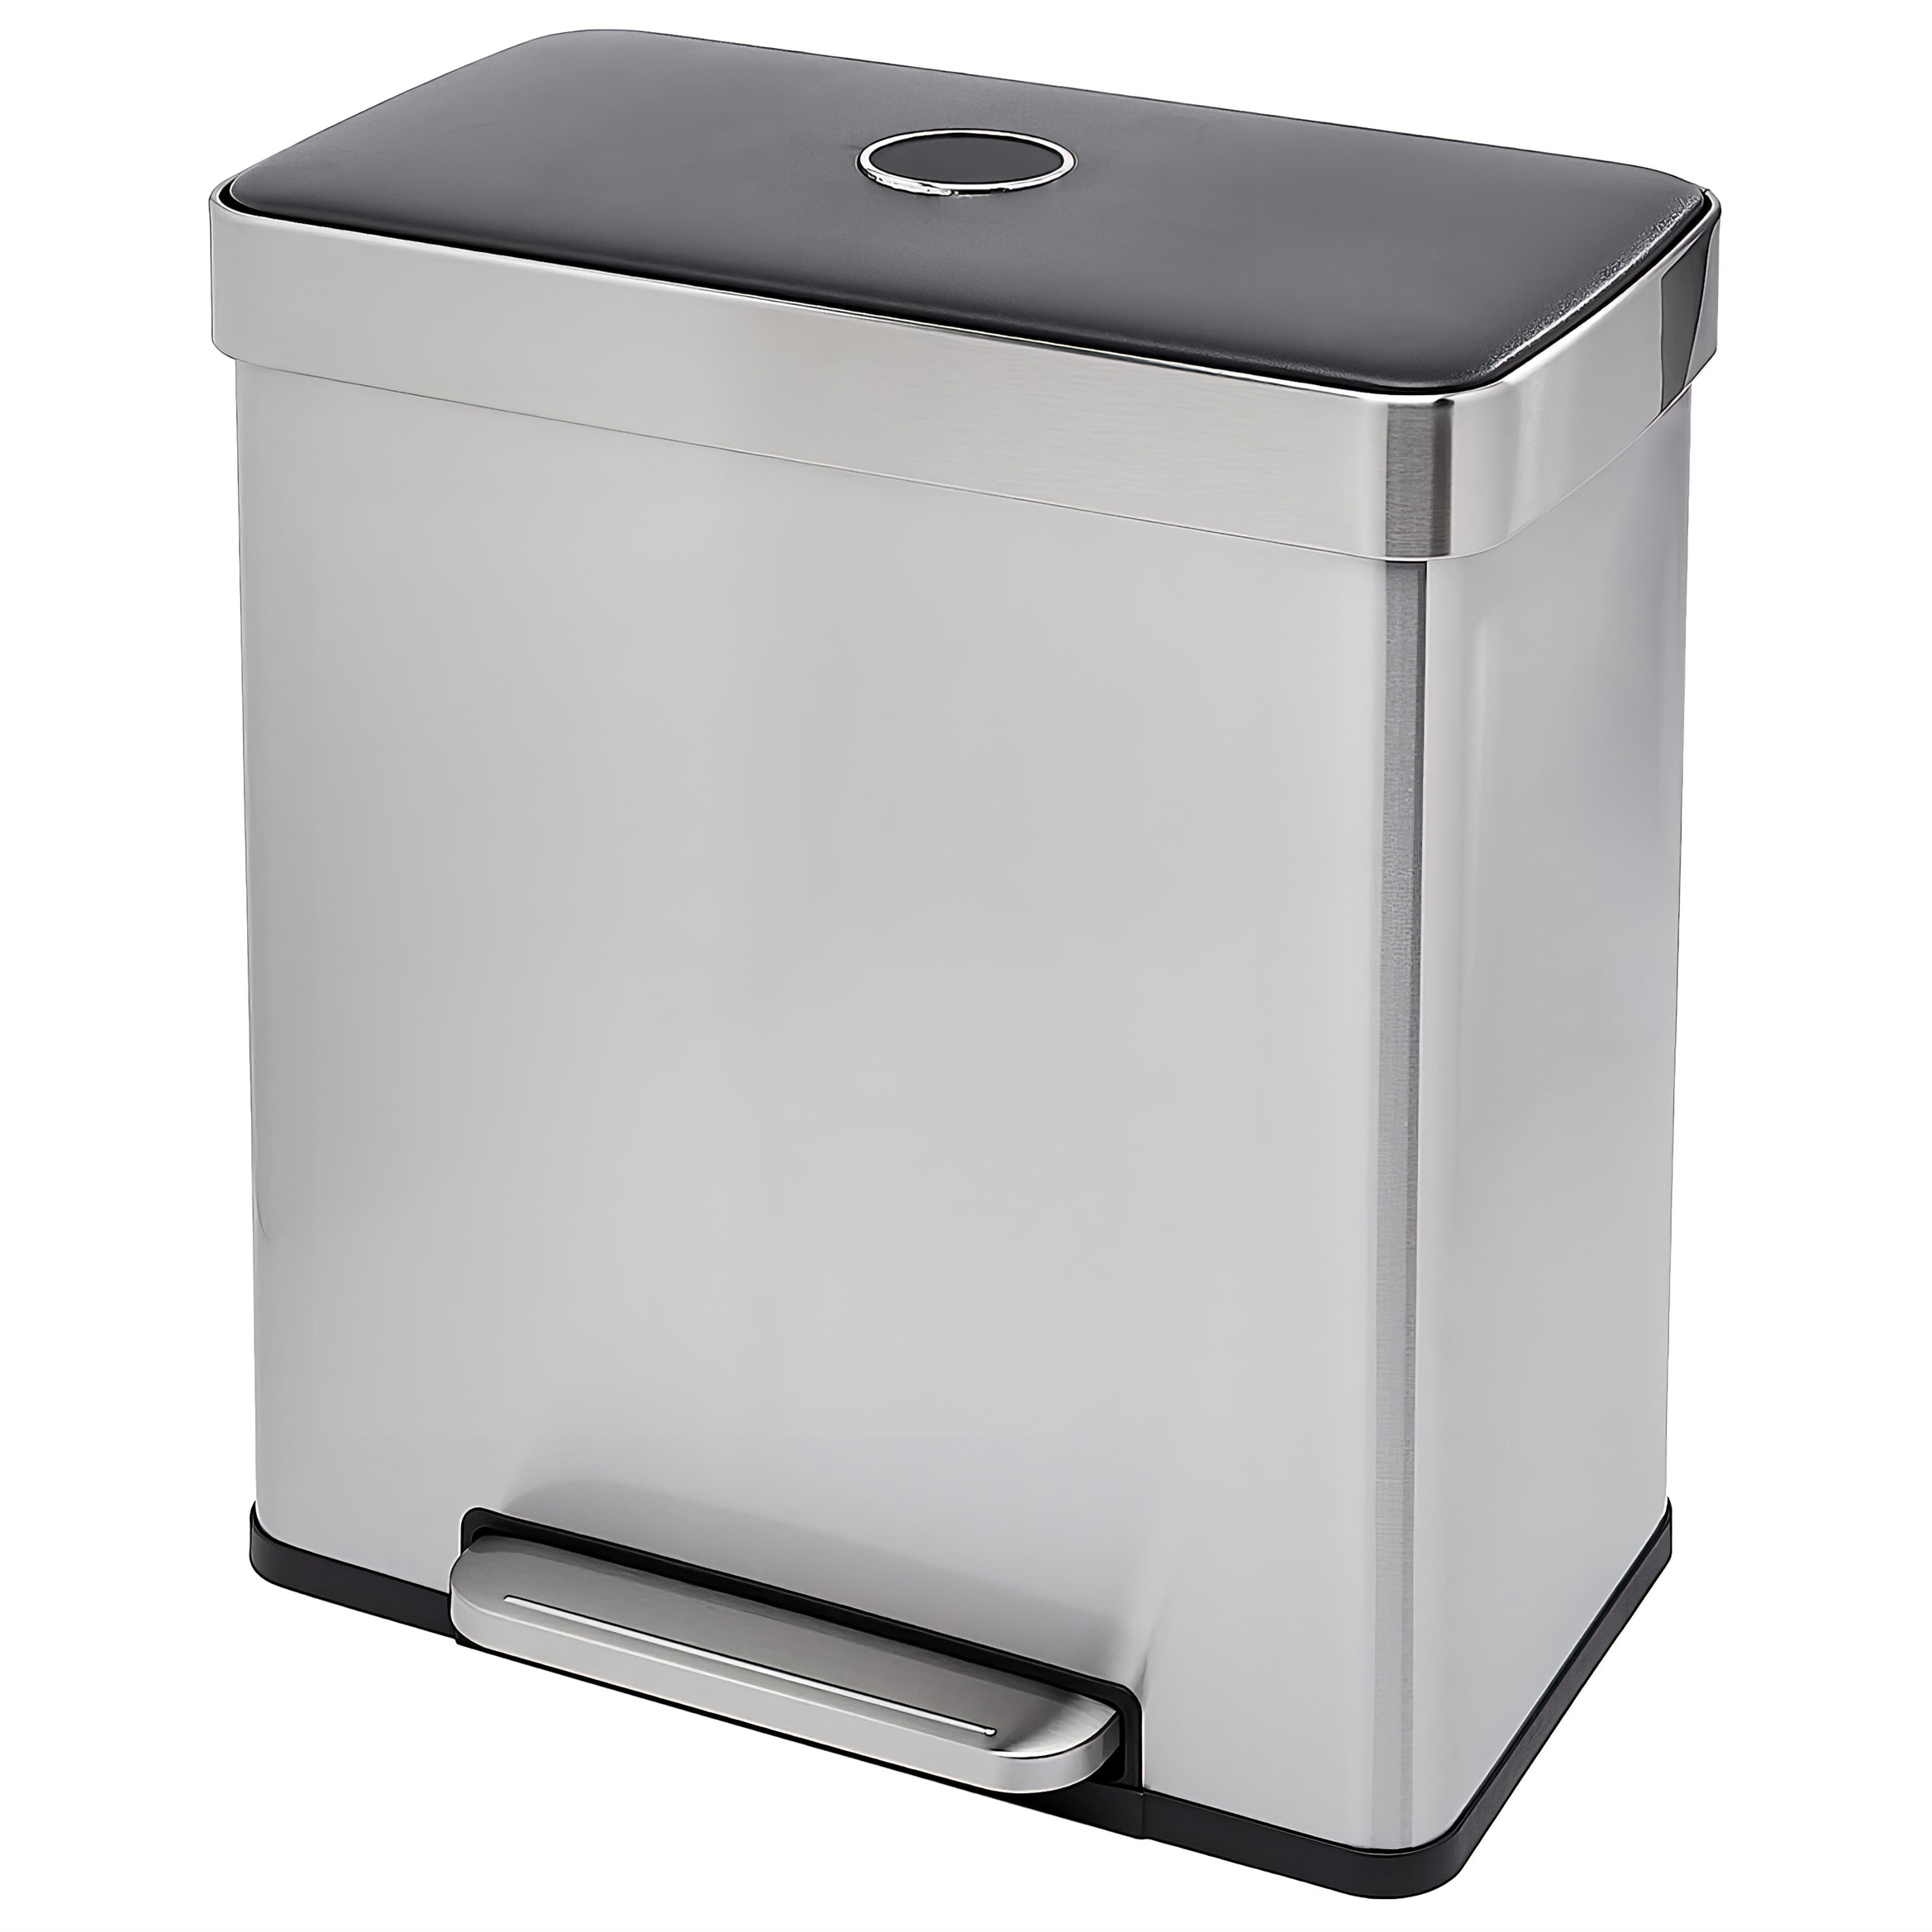 Stainless Steel 2 Compartment Pedal Bin – 2 x 30L